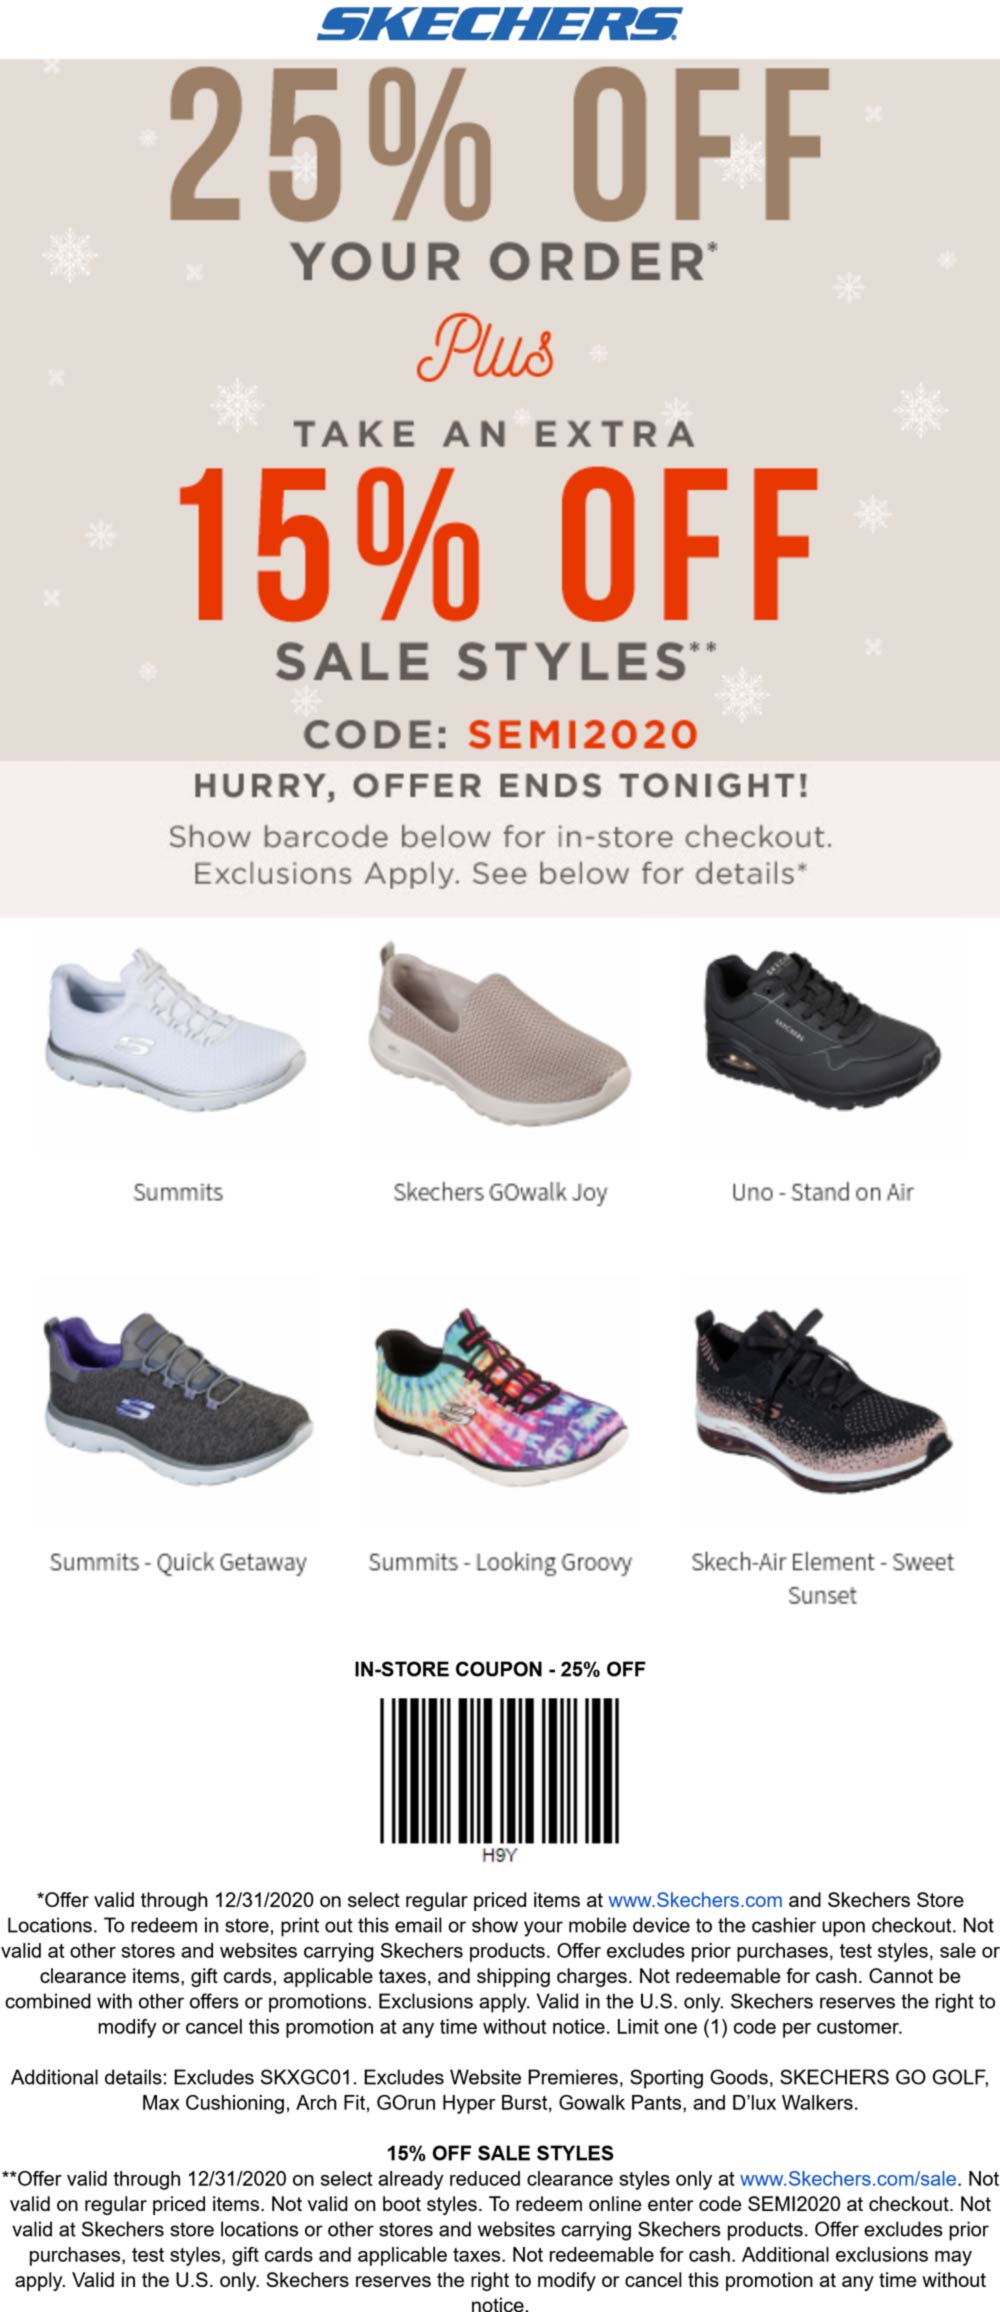 [August, 2021] 25-40% off shoes today at Skechers via promo code SEMI2020 #skechers coupon 